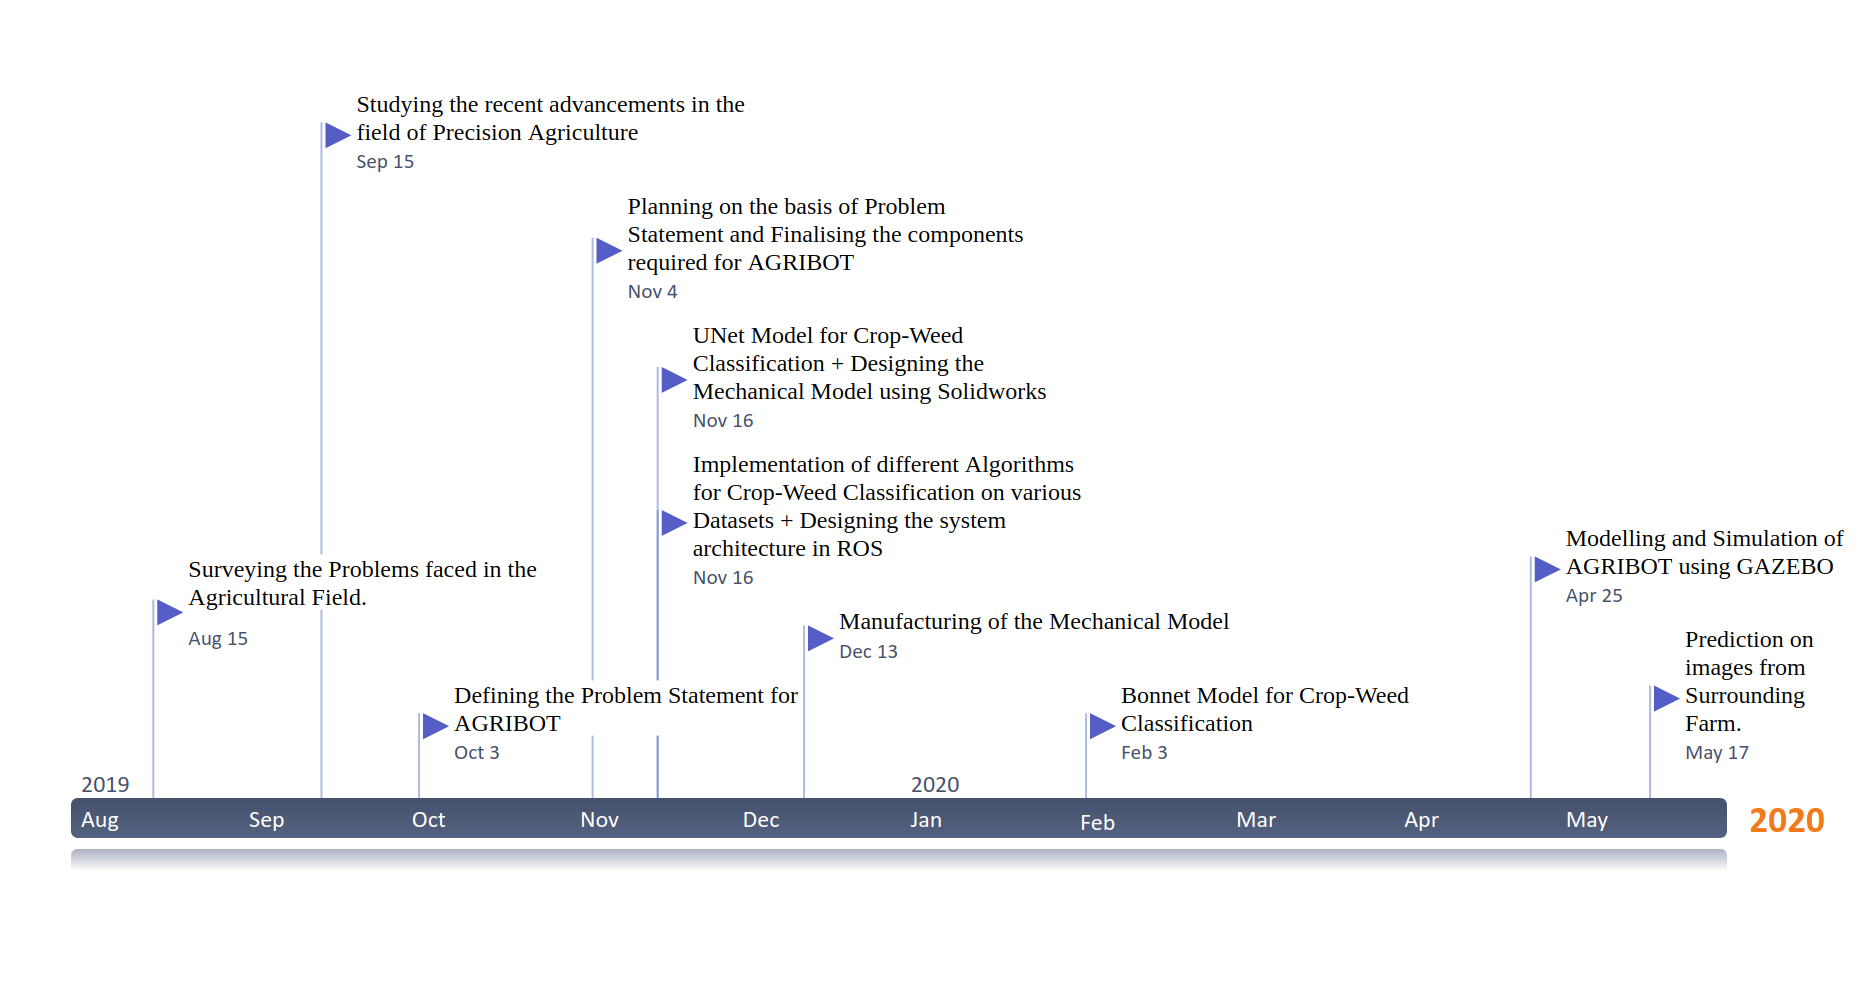 Timeline of Project